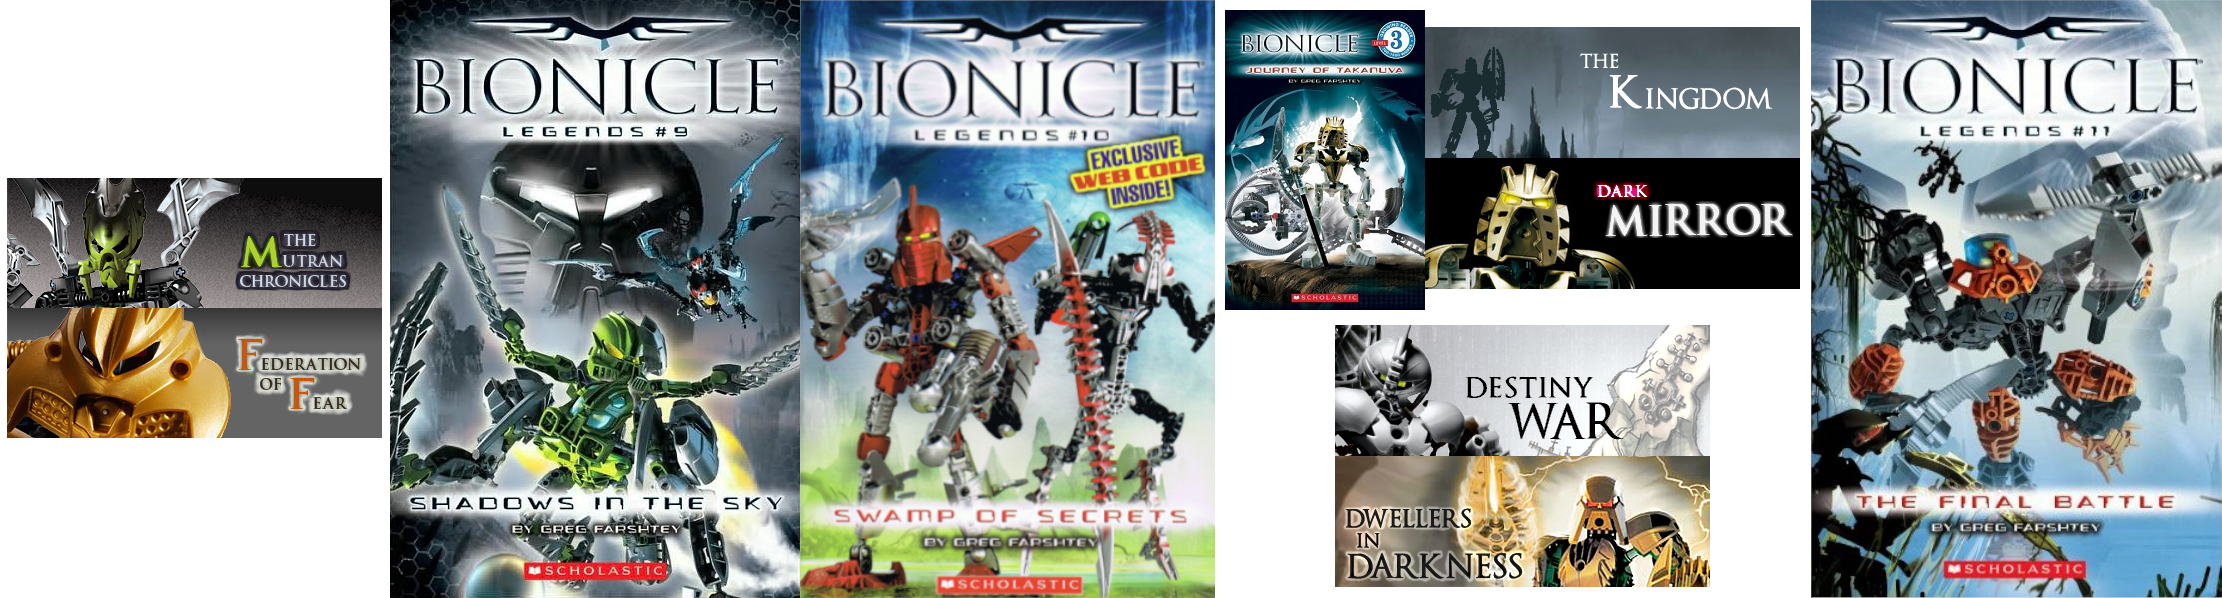 bionicle_2008_stories.png